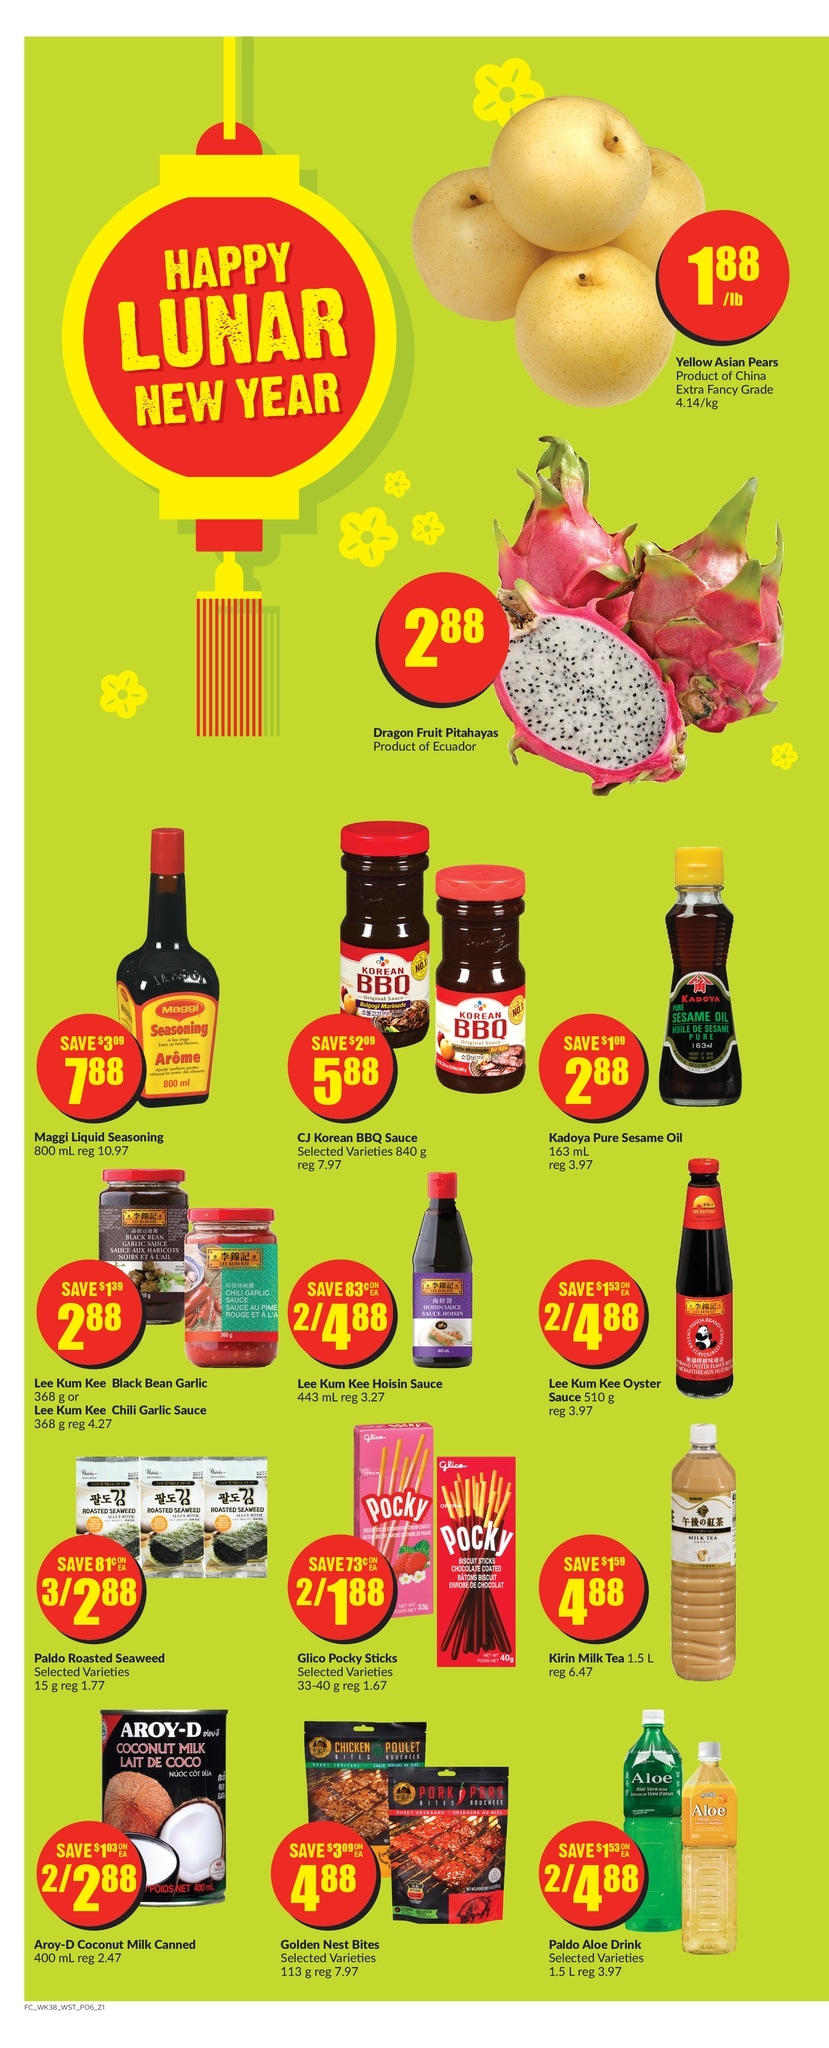 FreshCo British Columbia - Weekly Flyer Specials - Page 7